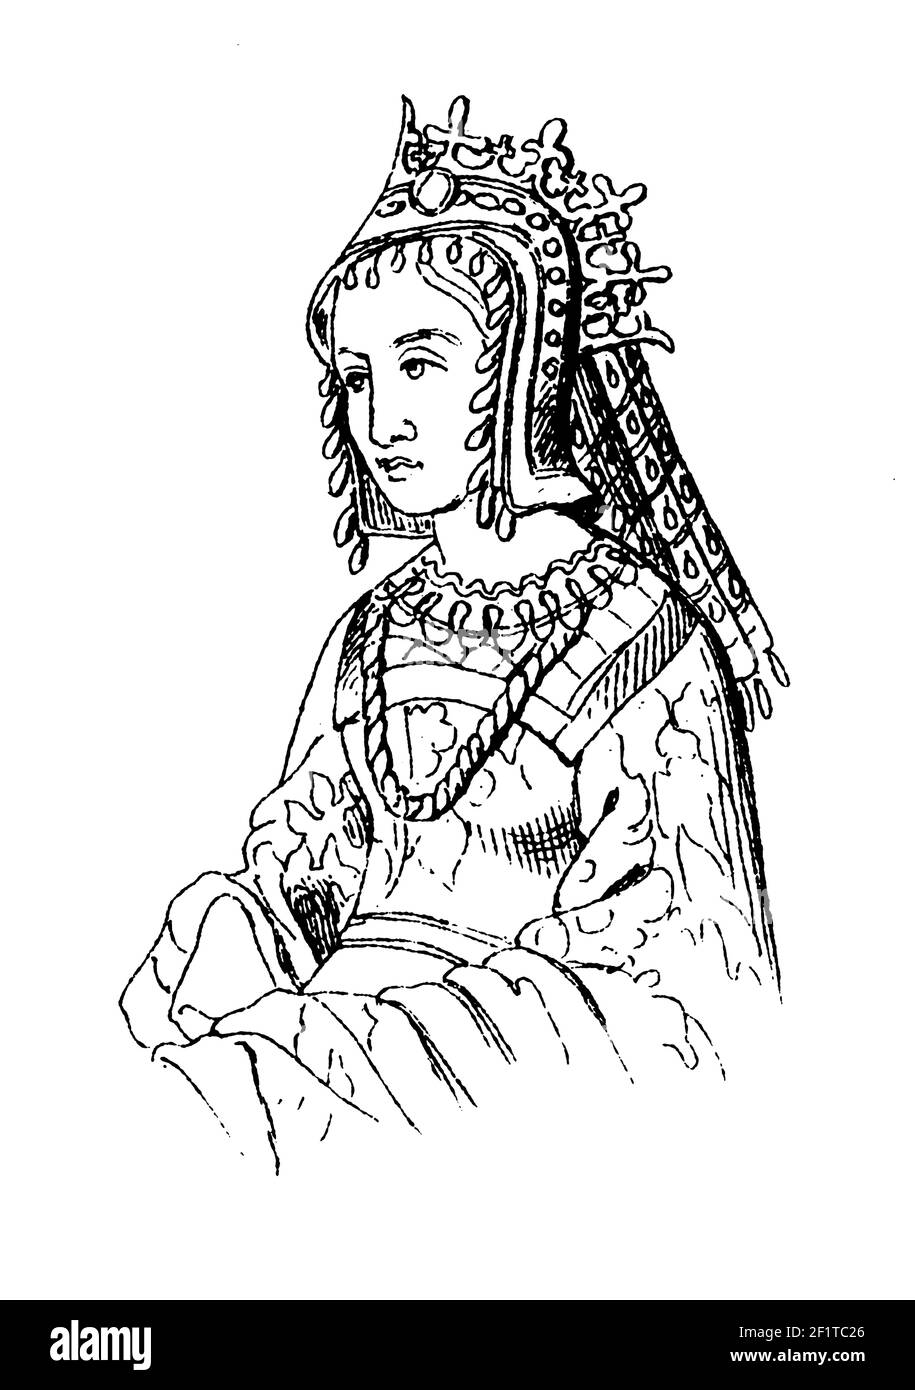 Antique 19th-century illustration of a portrait of Margaret of Anjou, Queen consort of England. She was born on March 23, 1430 in Lorraine, France and Stock Photo